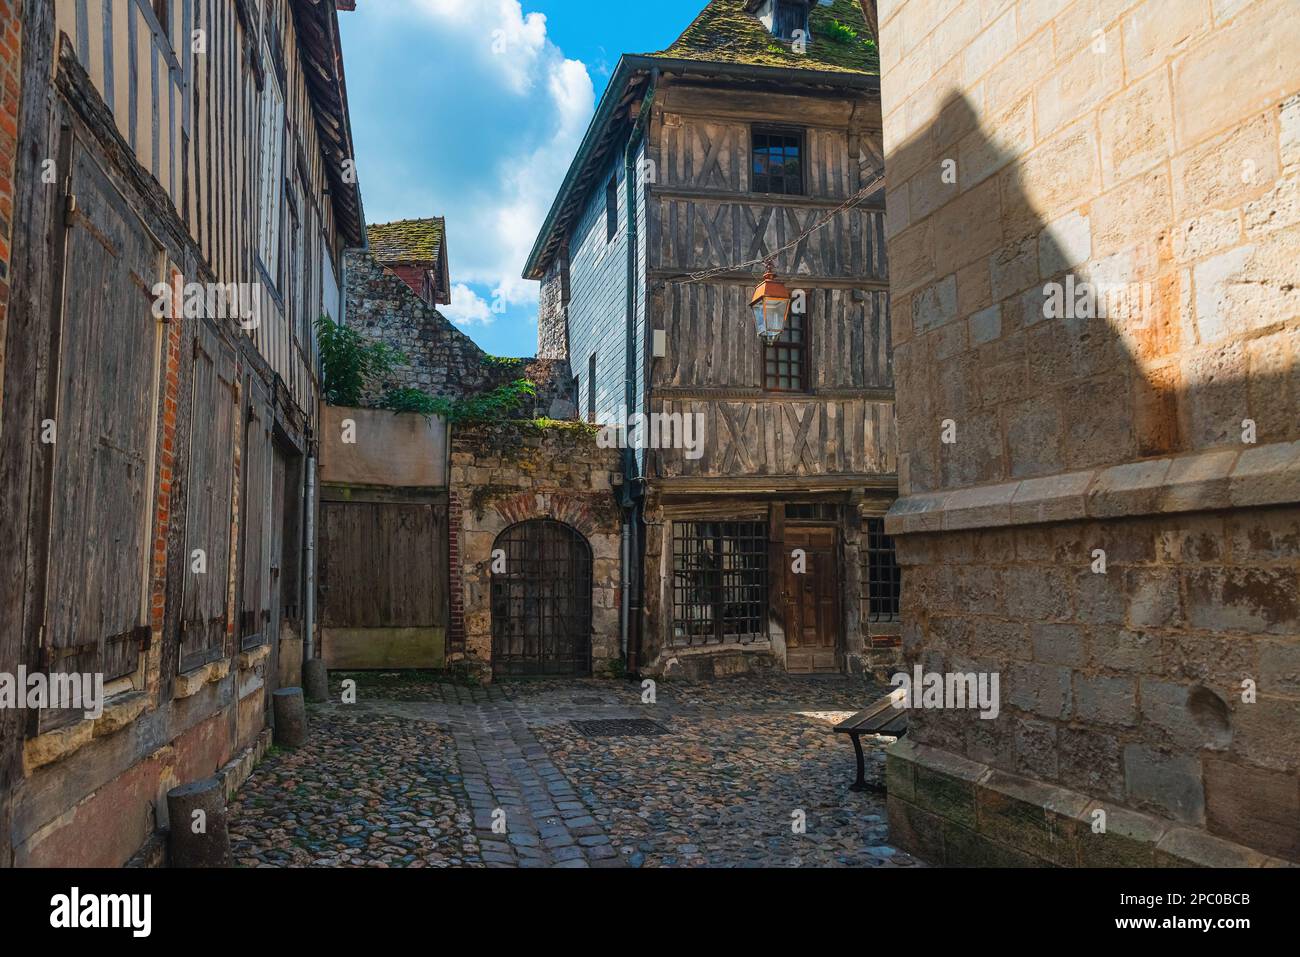 Medieval cozy empty street with timber framing houses in Honfleur town, Normandy, France. Popular travel destination Stock Photo